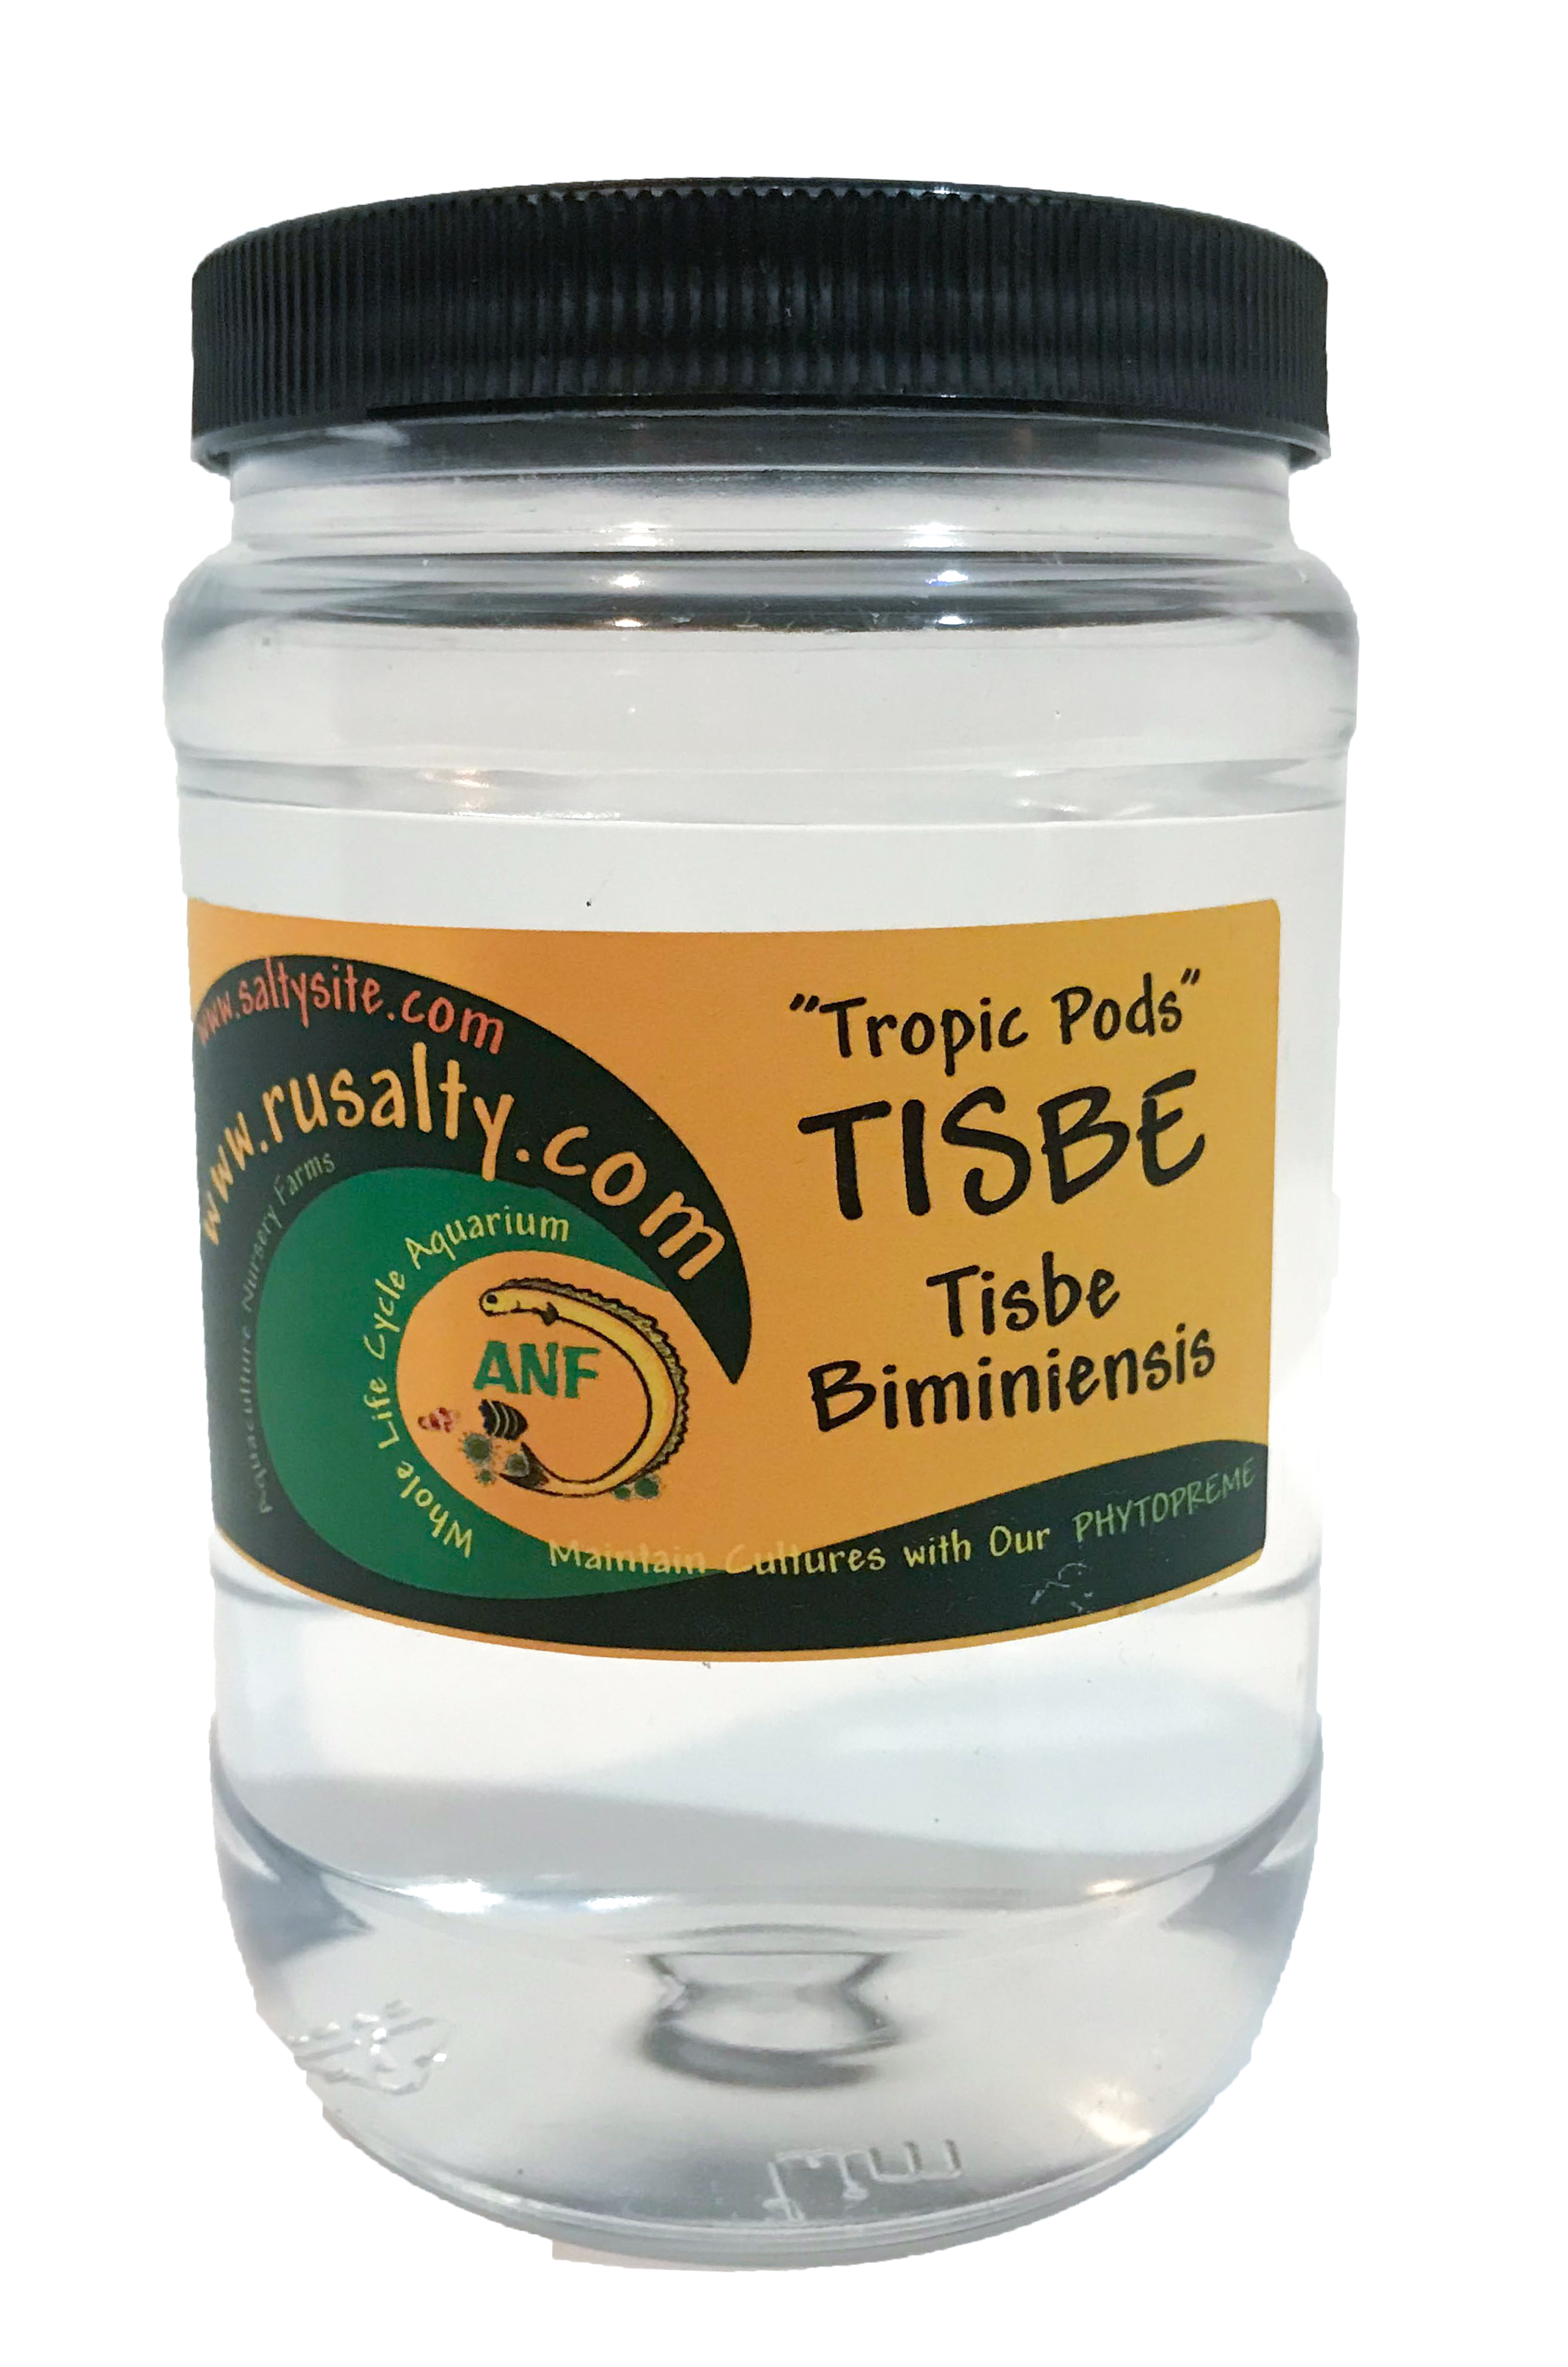 tisbe-pods-copepods-for-sale.-buy-tisbe-or-tisbe-biminiensis-copepods-to-feed-mandarin-fish-and-saltwater-aquarium..jpg